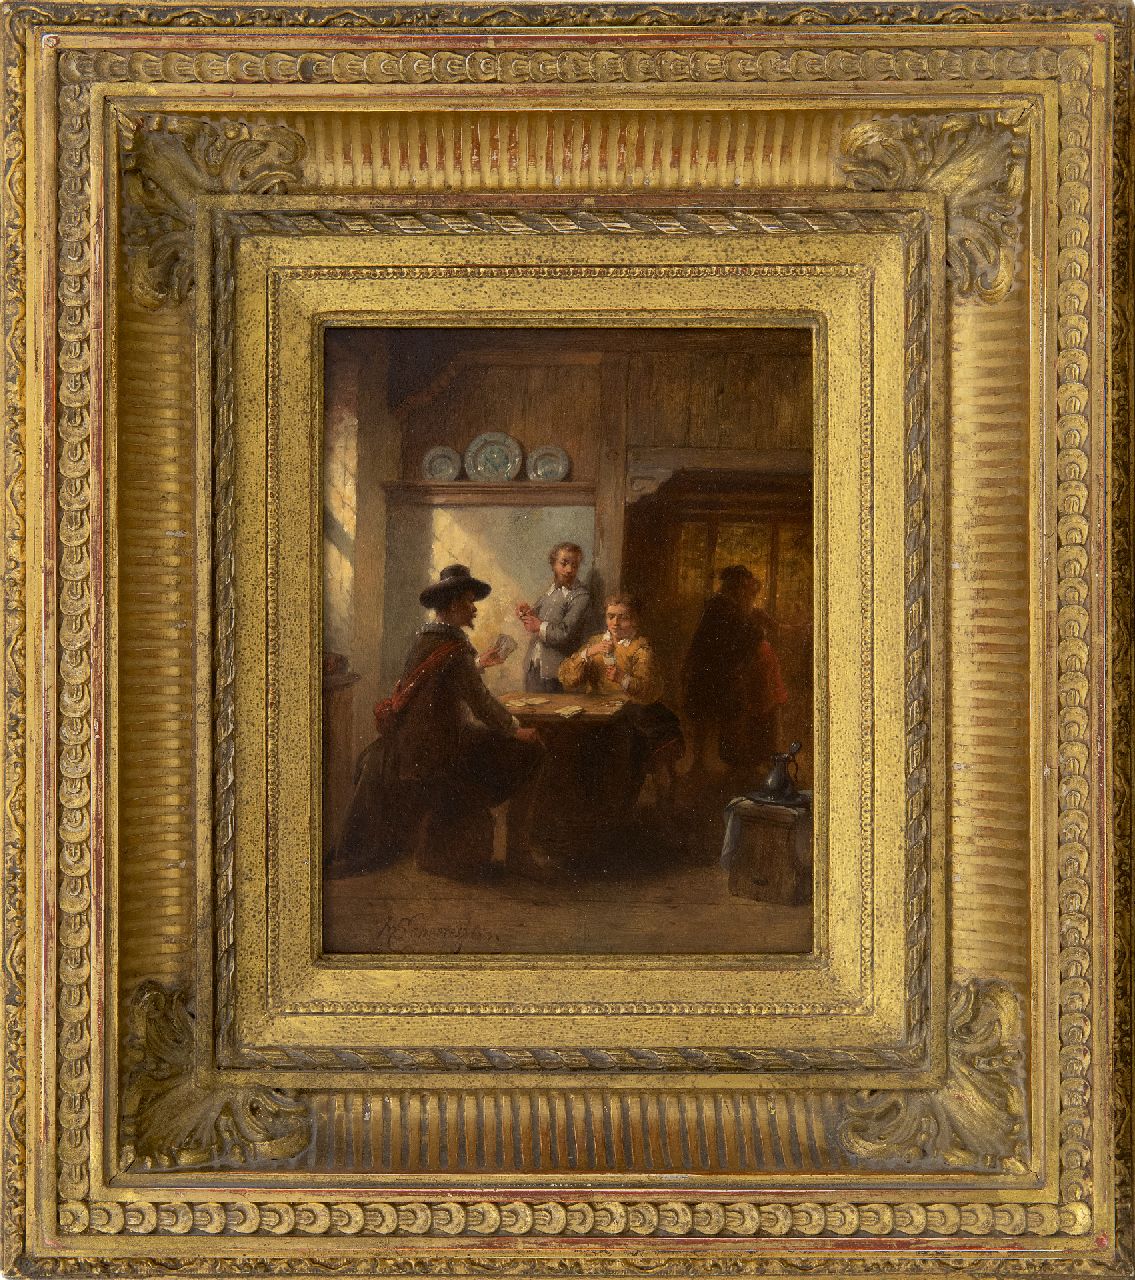 Scheeres H.J.  | Hendricus Johannes Scheeres, Card players and a courtship in an Old Dutch interior, oil on panel 18.6 x 15.1 cm, signed l.l. and dated '63